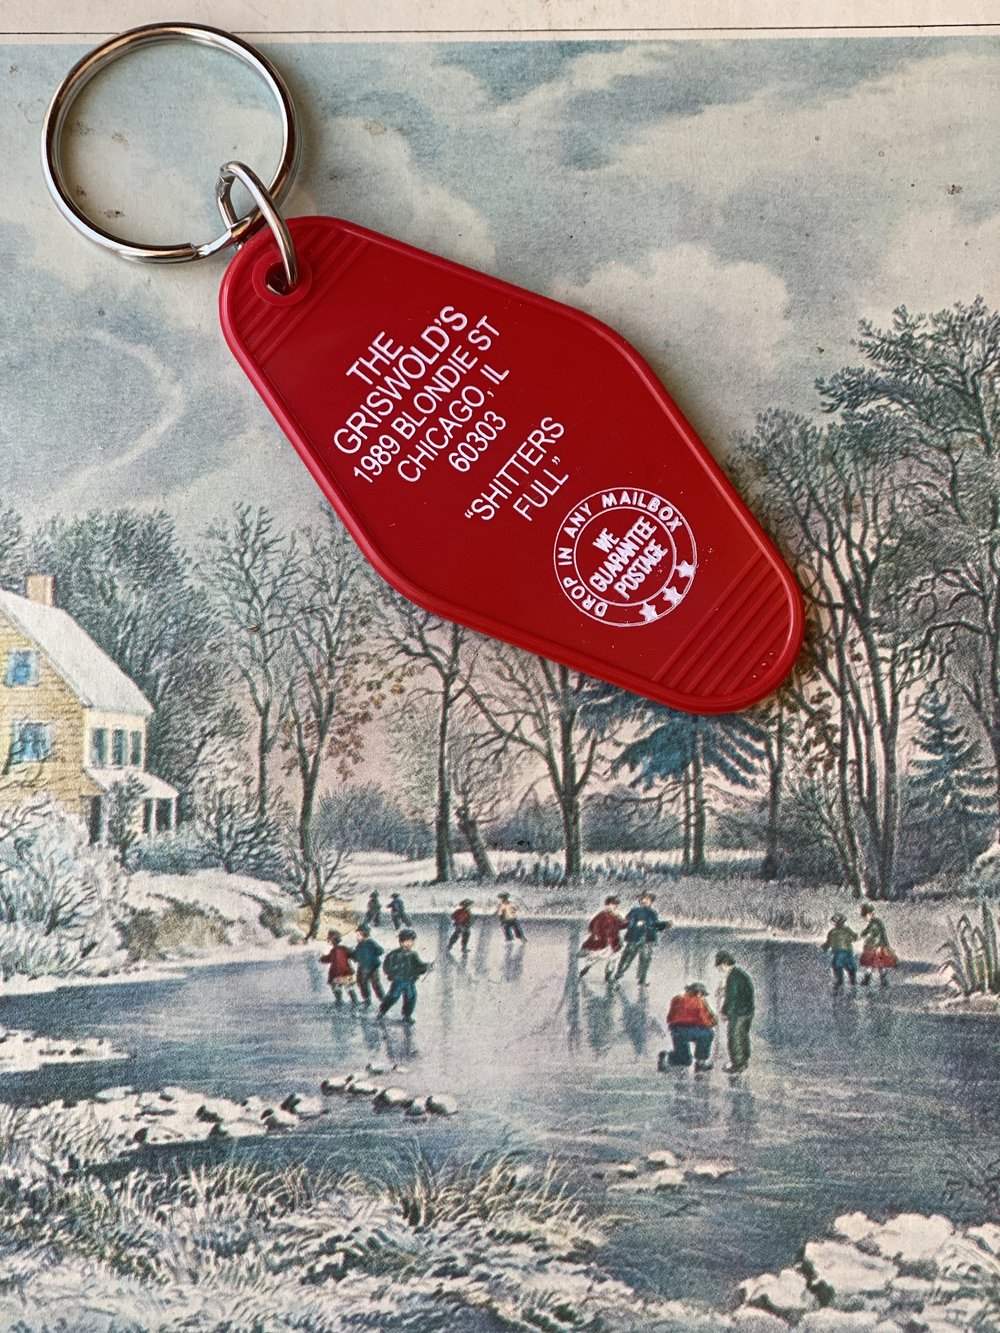 The Greatest House in the World Vintage Hotel Keychain – CIRCA